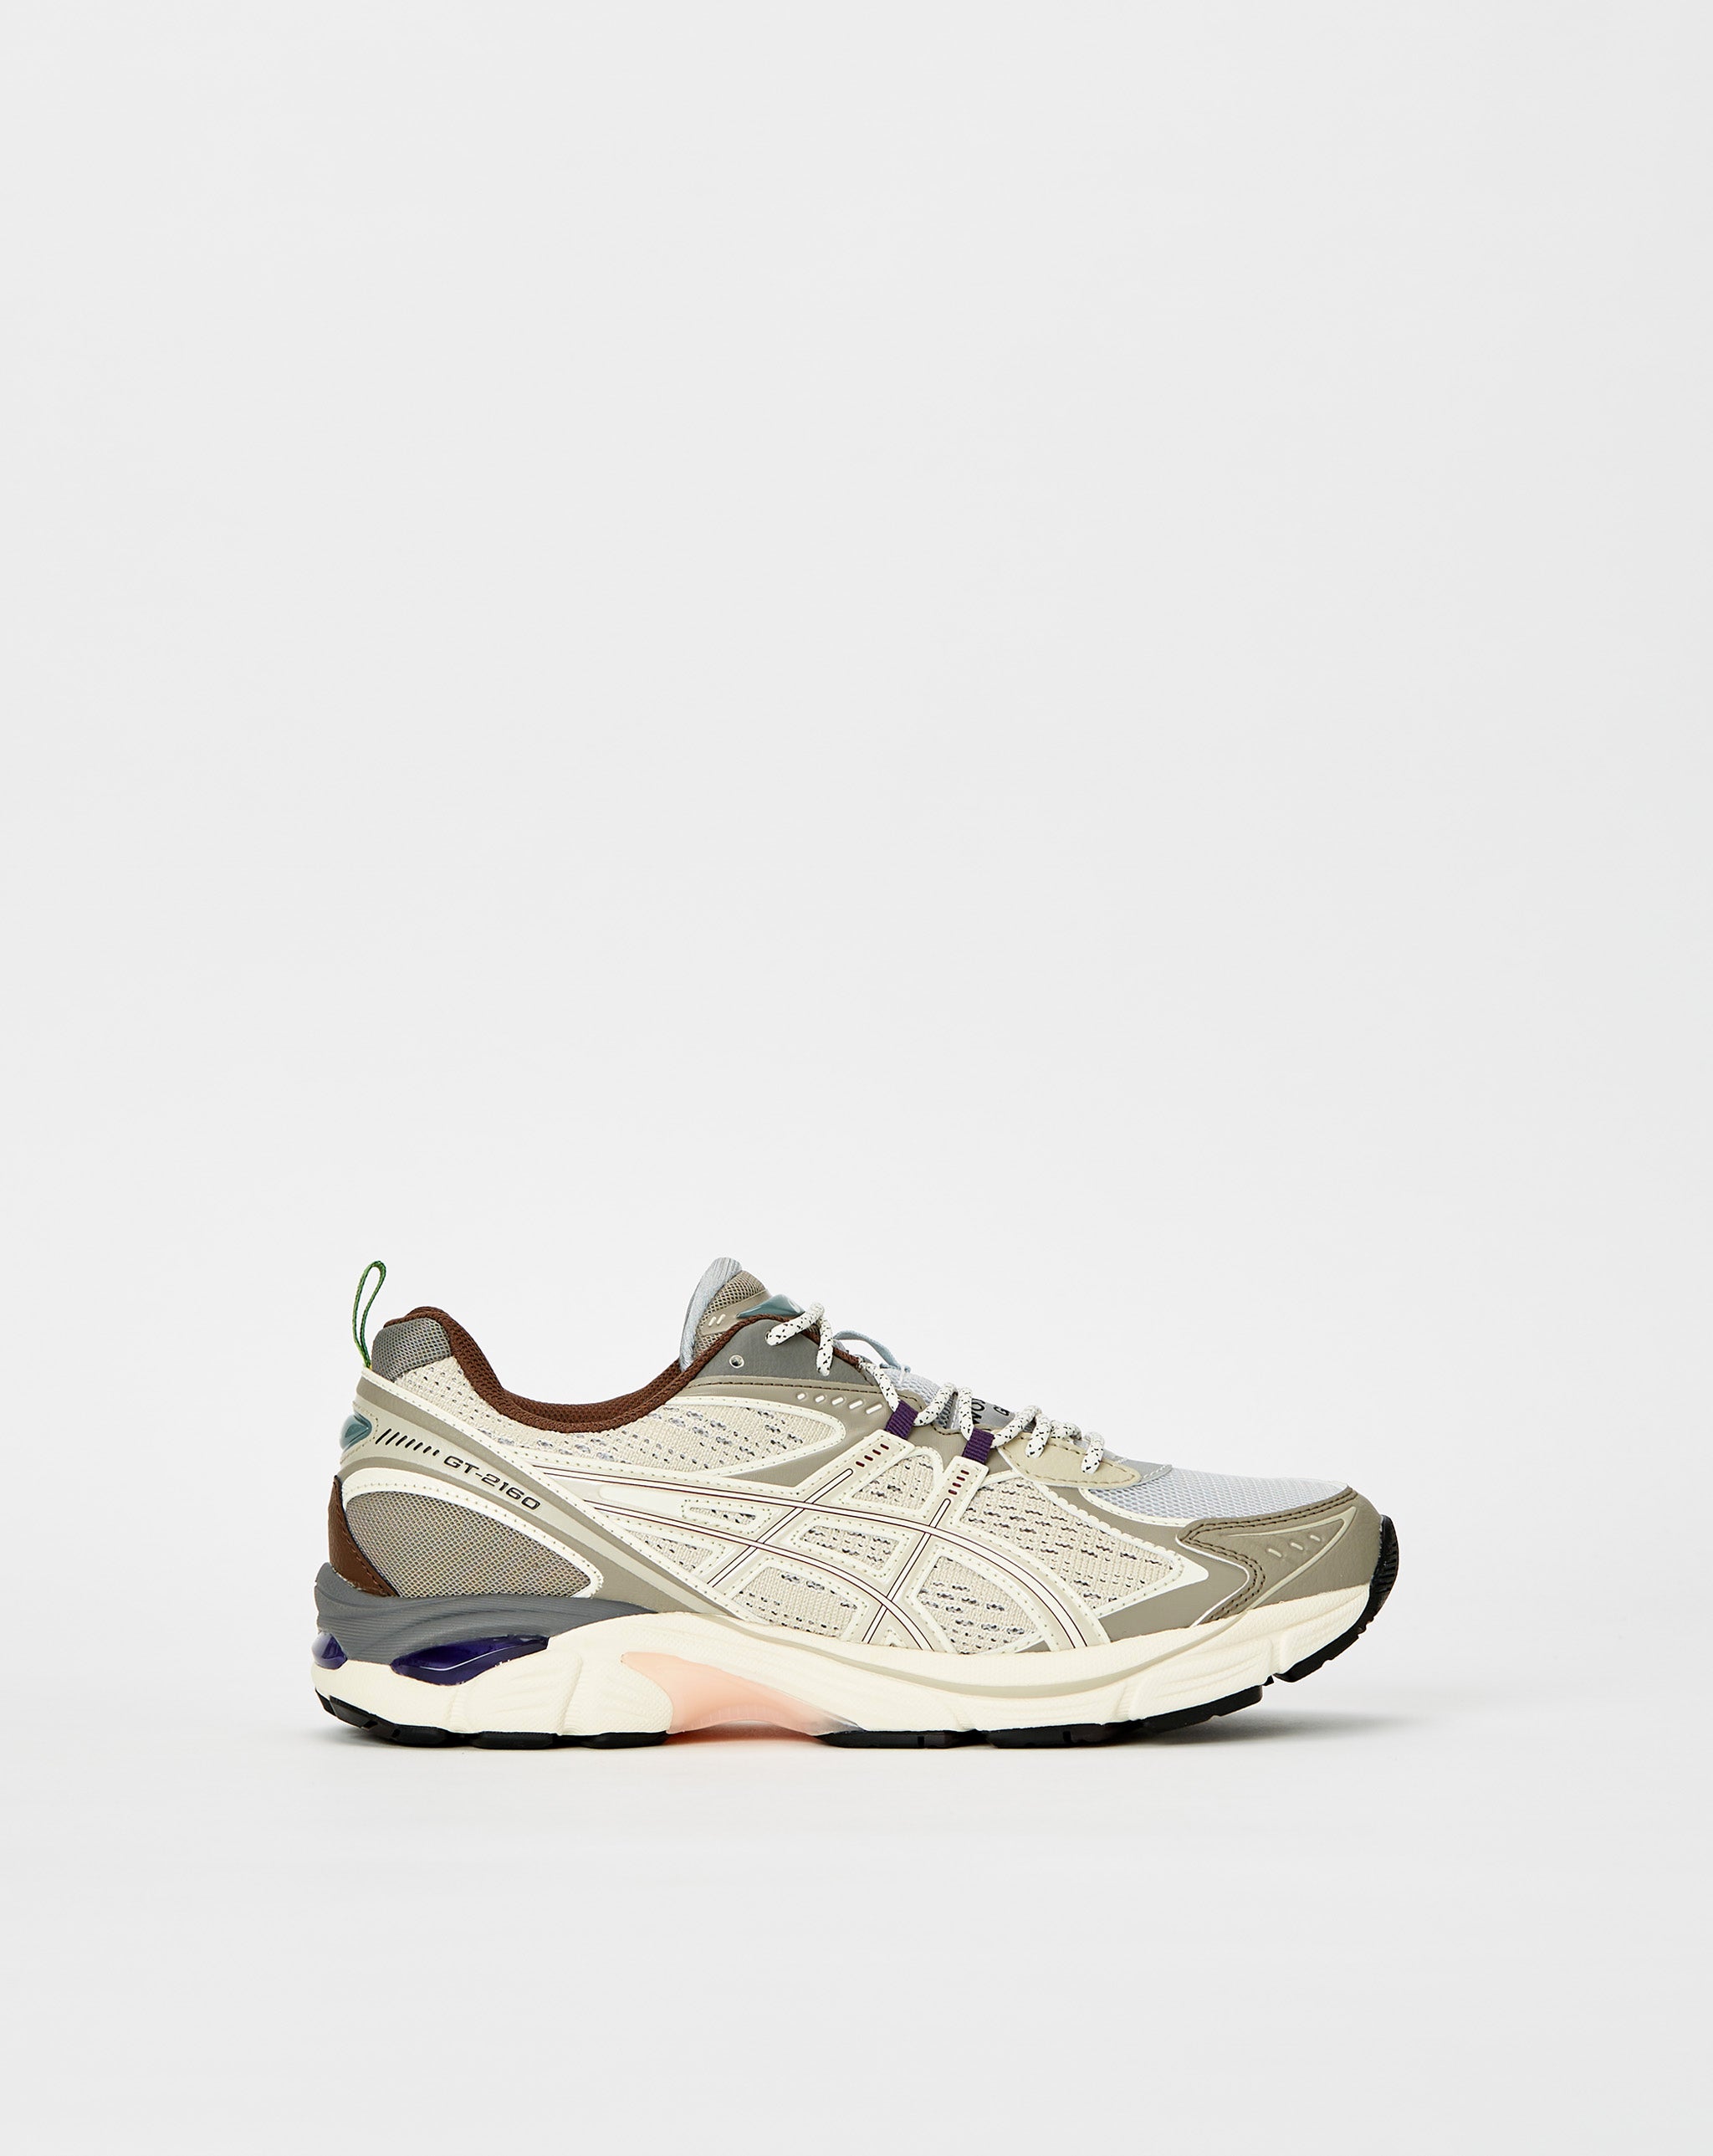 asics Inventory on the way  - Cheap Cerbe Jordan outlet